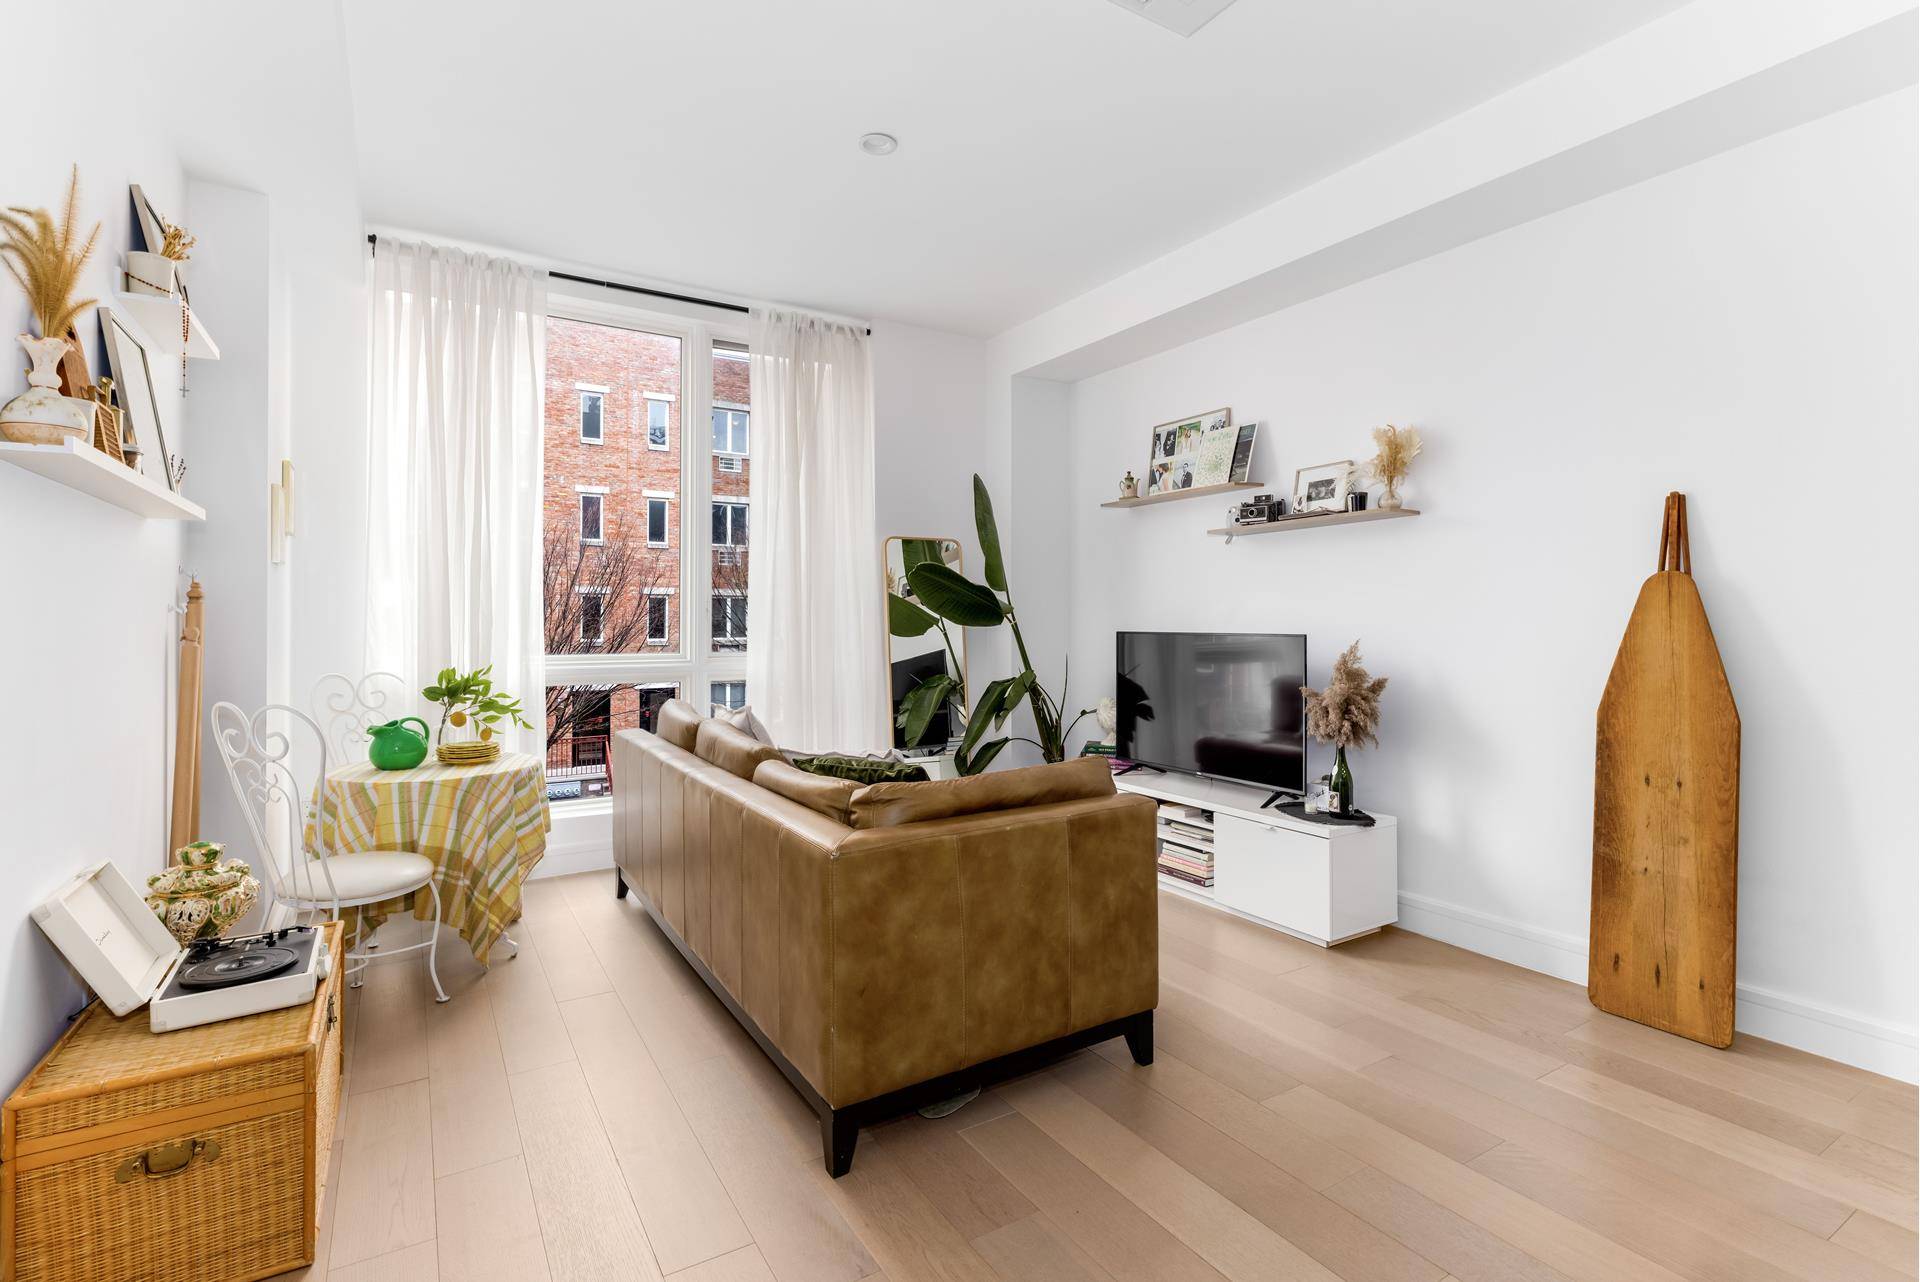 Ideally situated just south of Park Slope, Stanton on Sixth is located in the lovely Greenwood neighborhood.